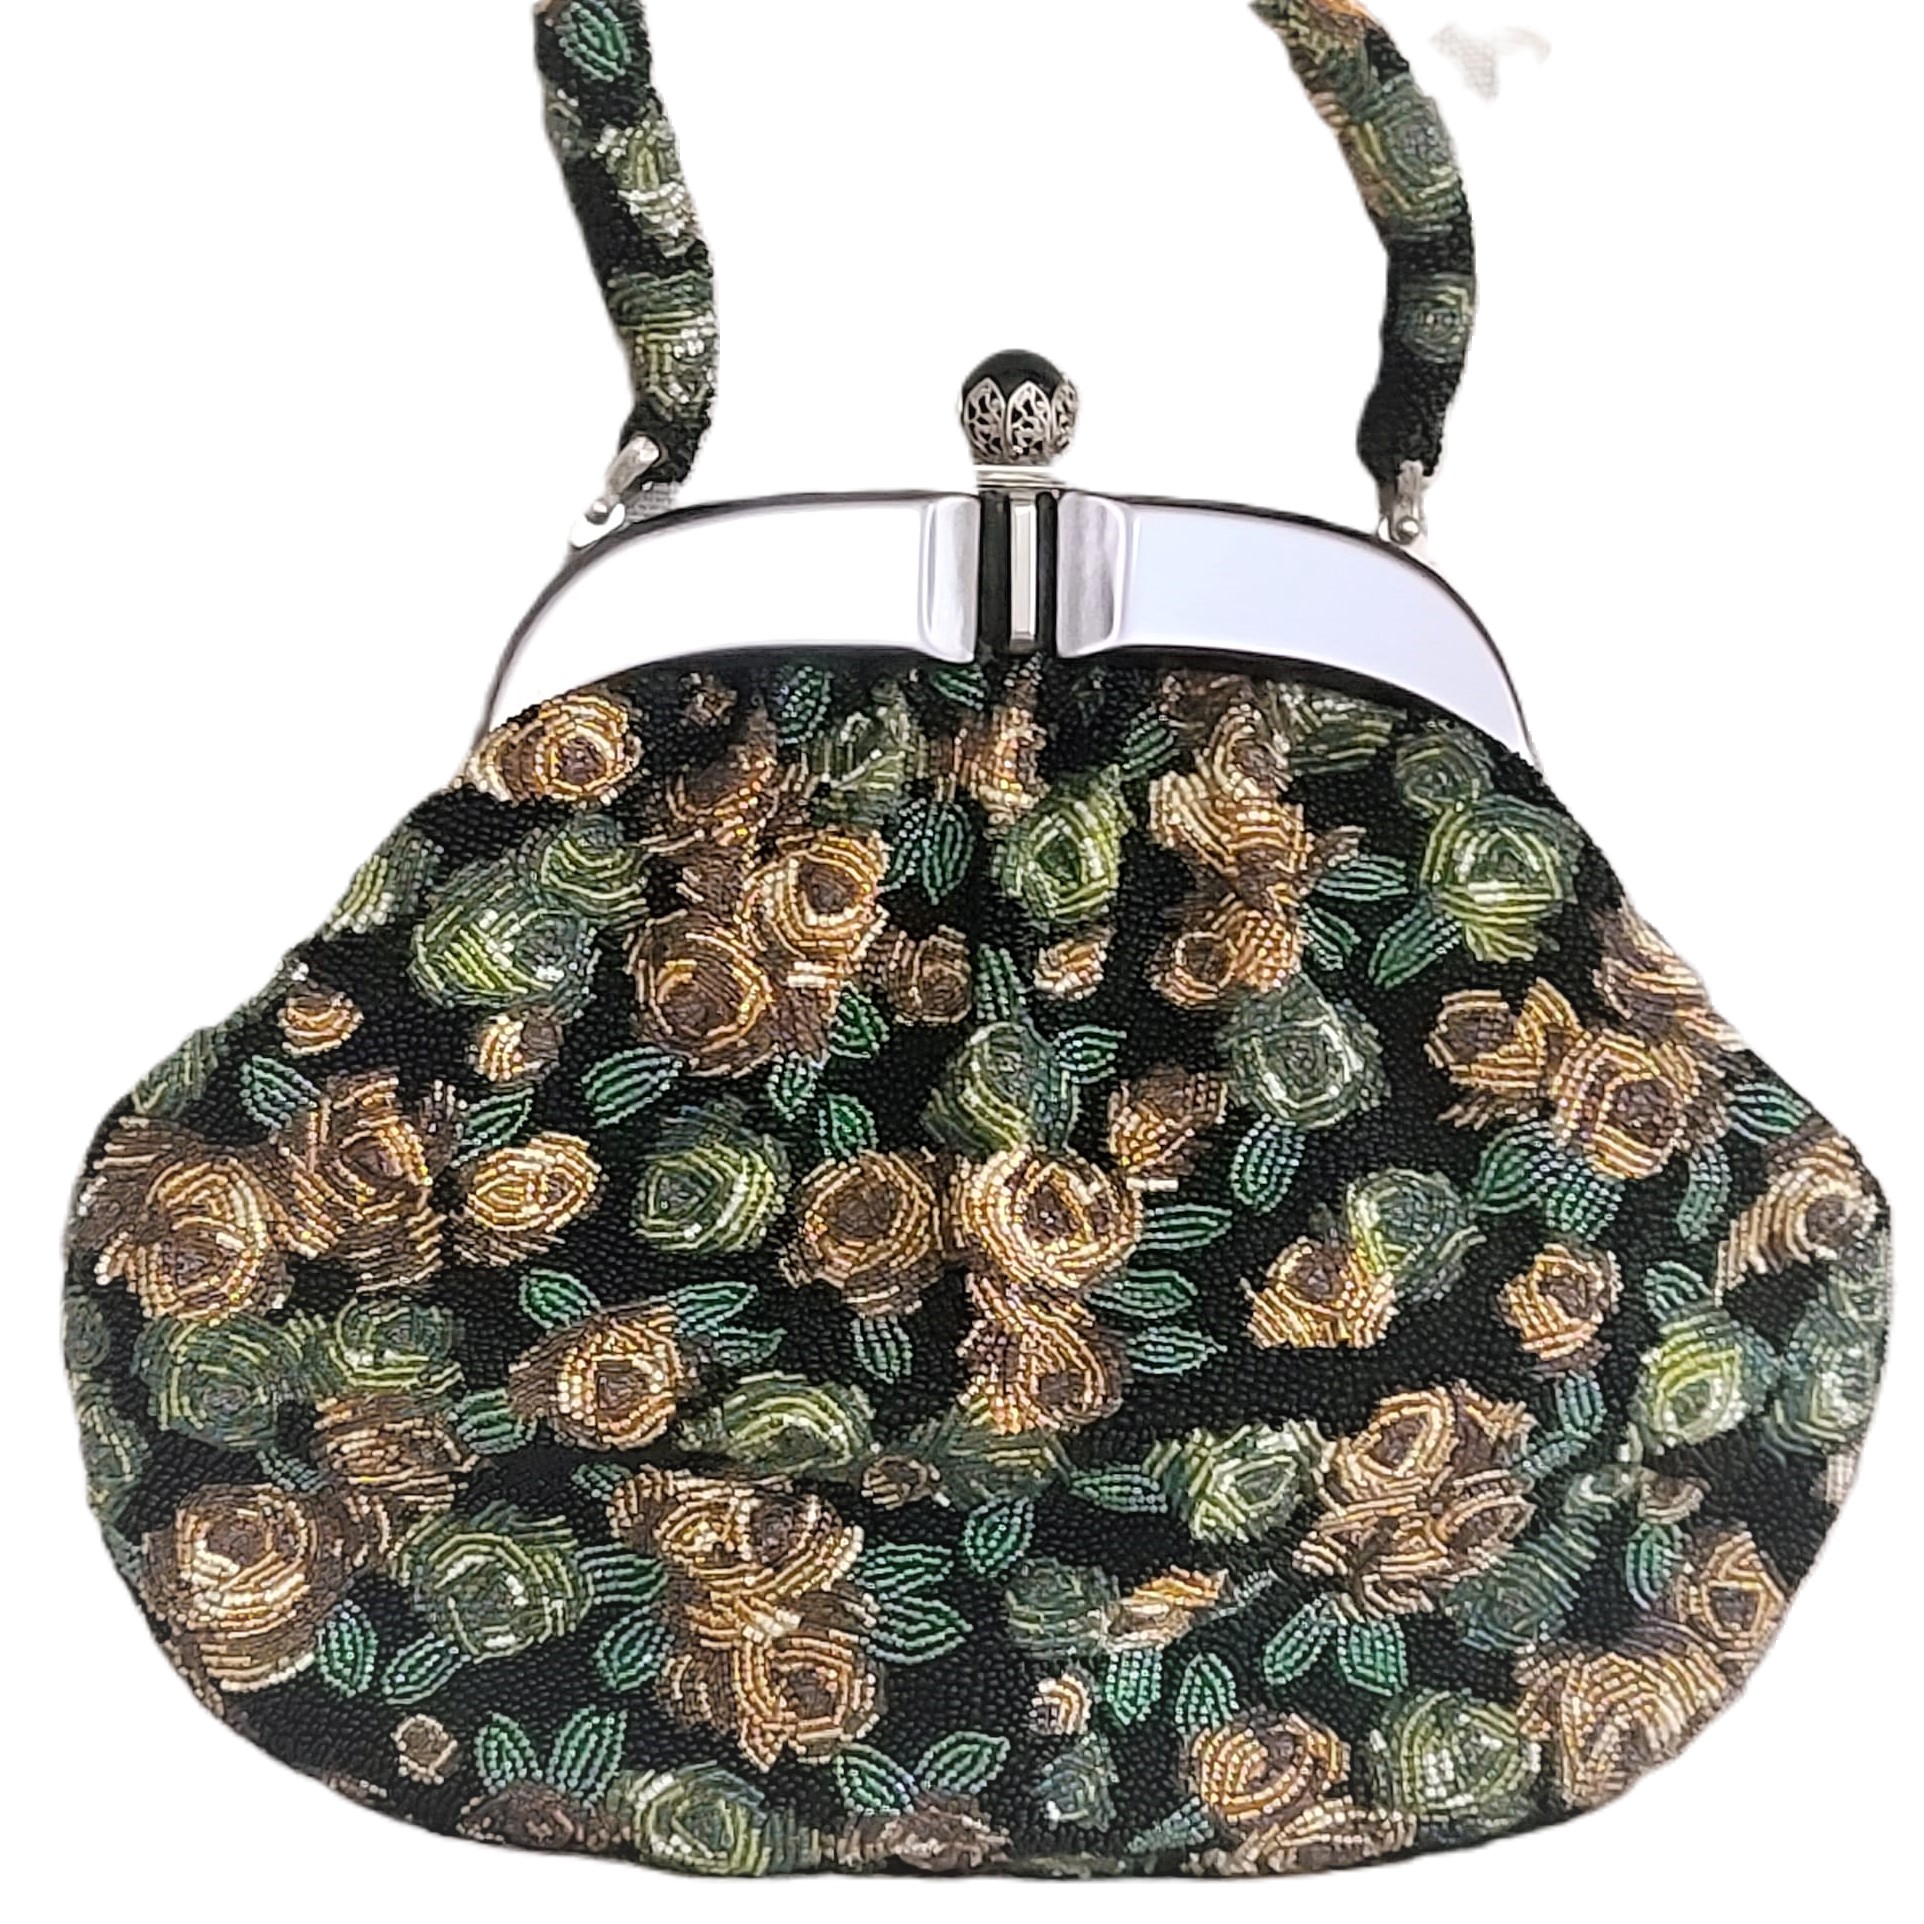 Beaded floral vintage purse with moonglow front panel